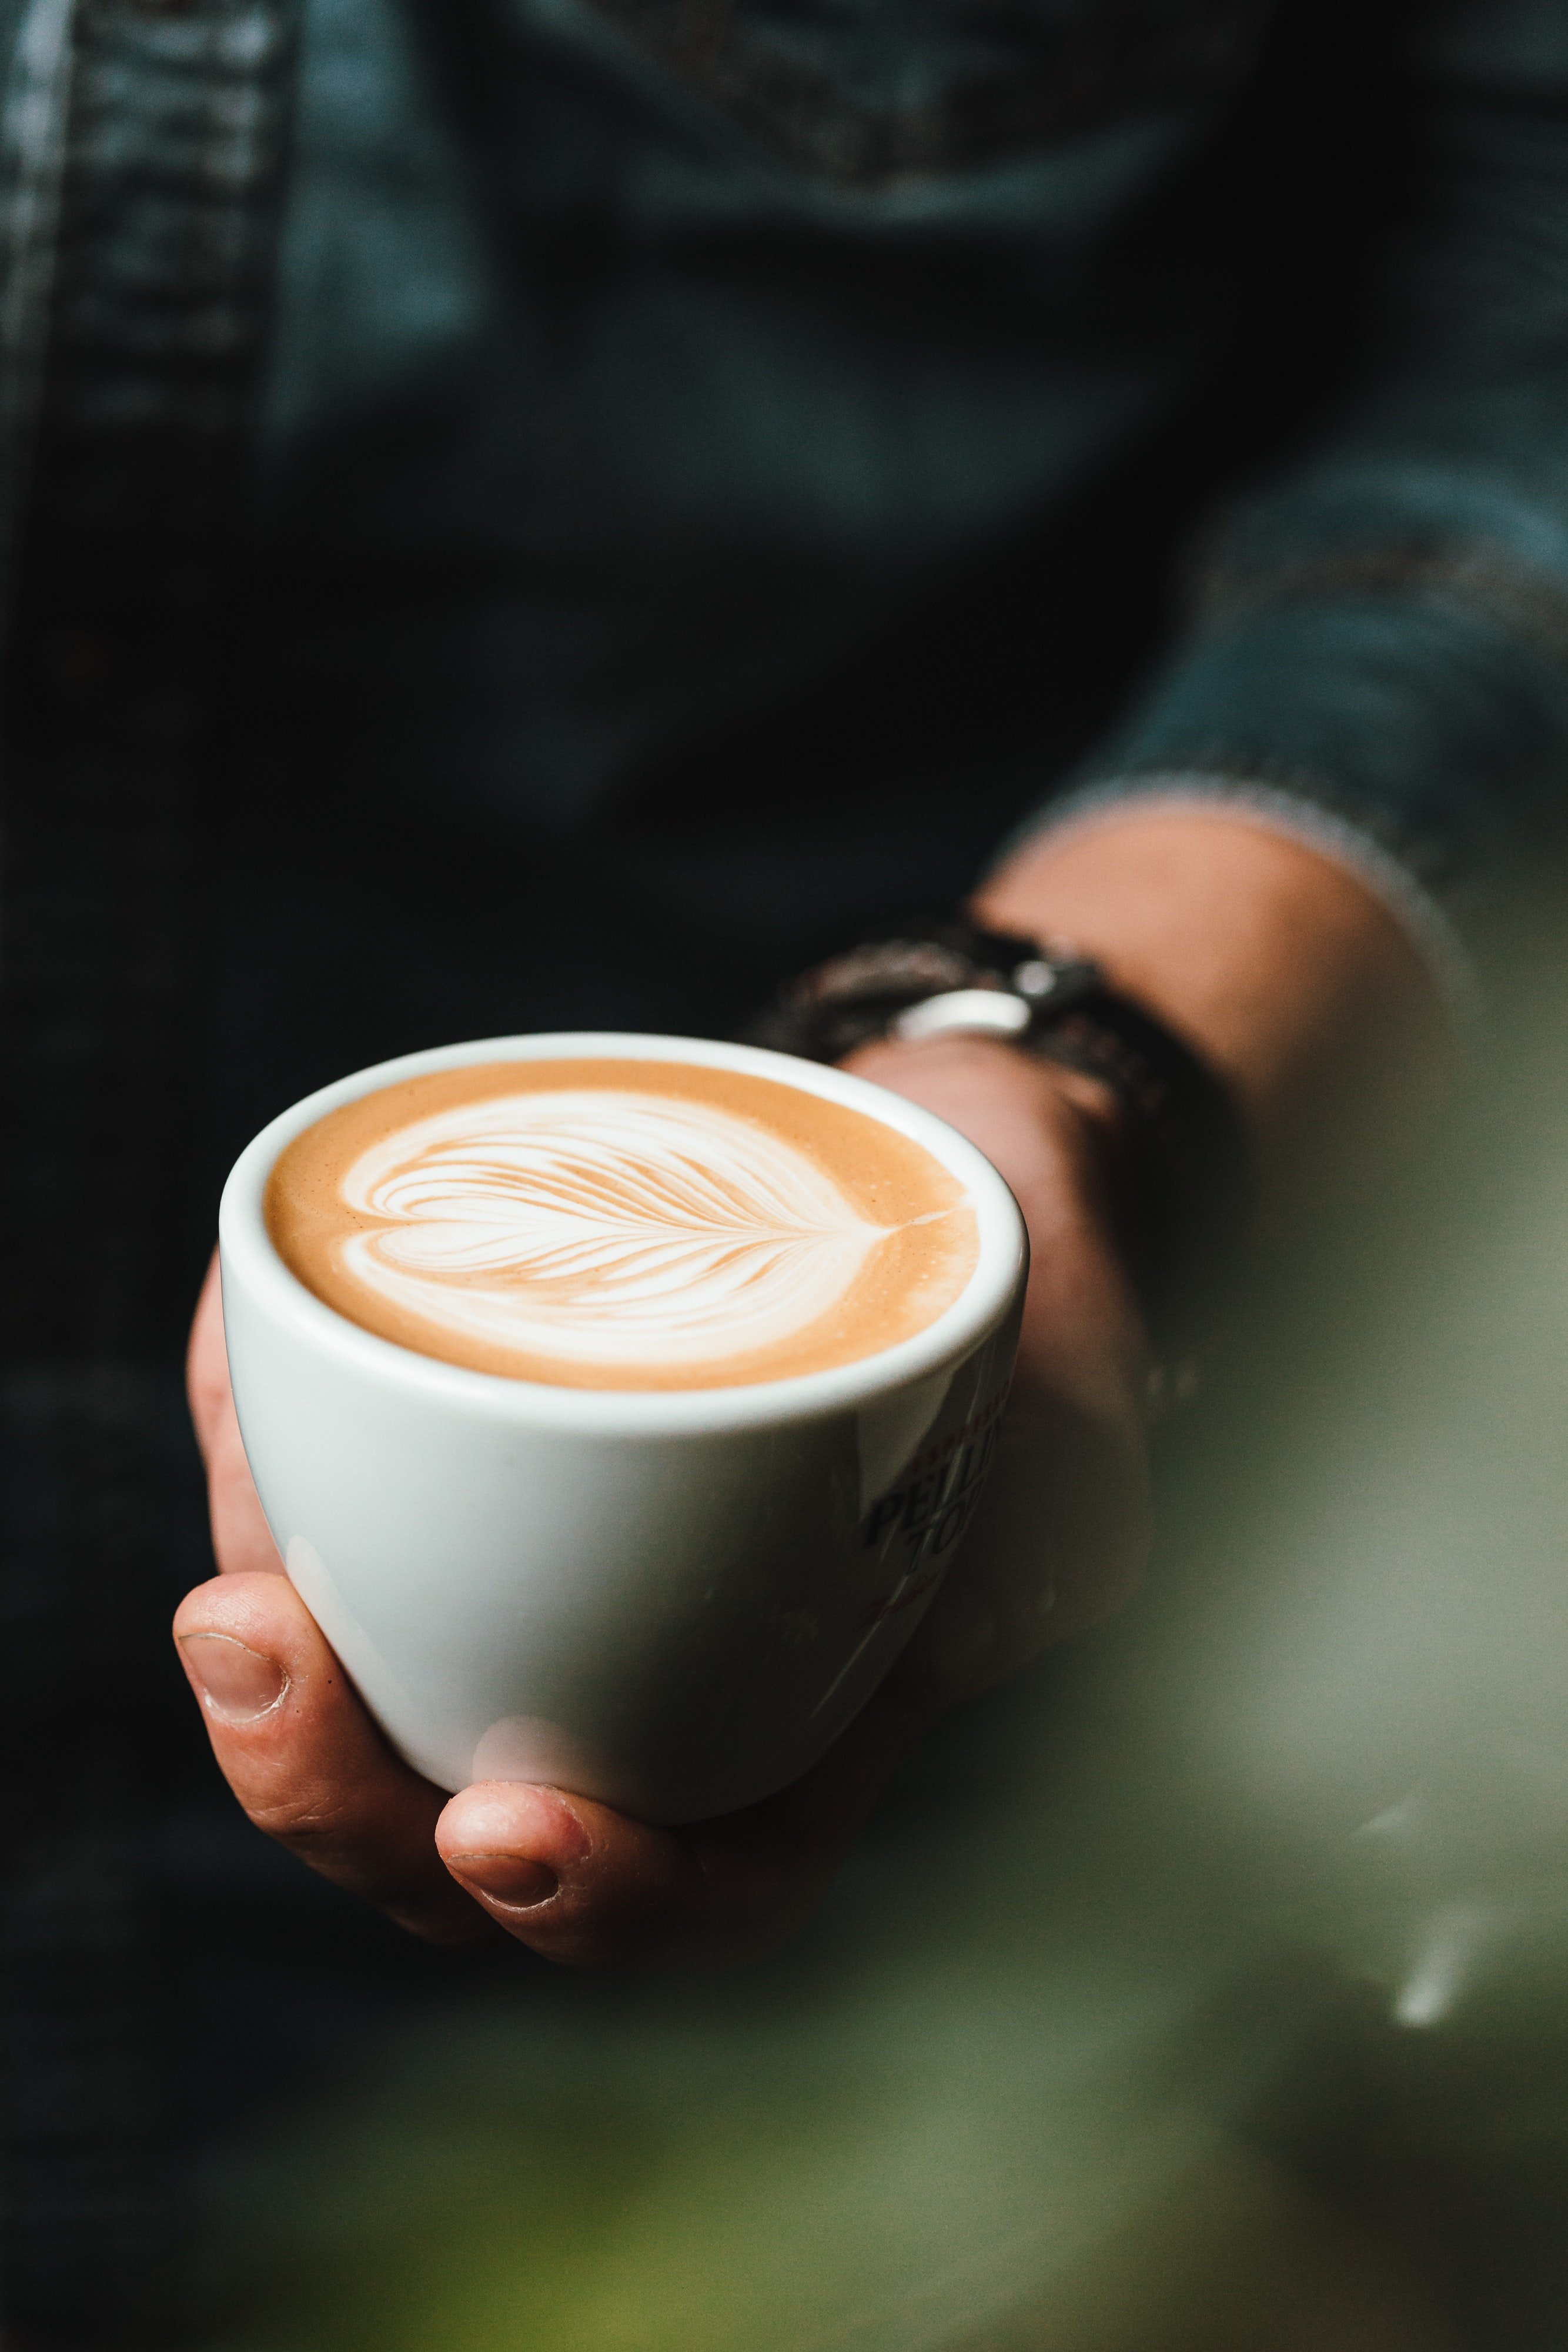 Lucy asked Paul to serve a cappuccino to a customer. | Source: Unsplash